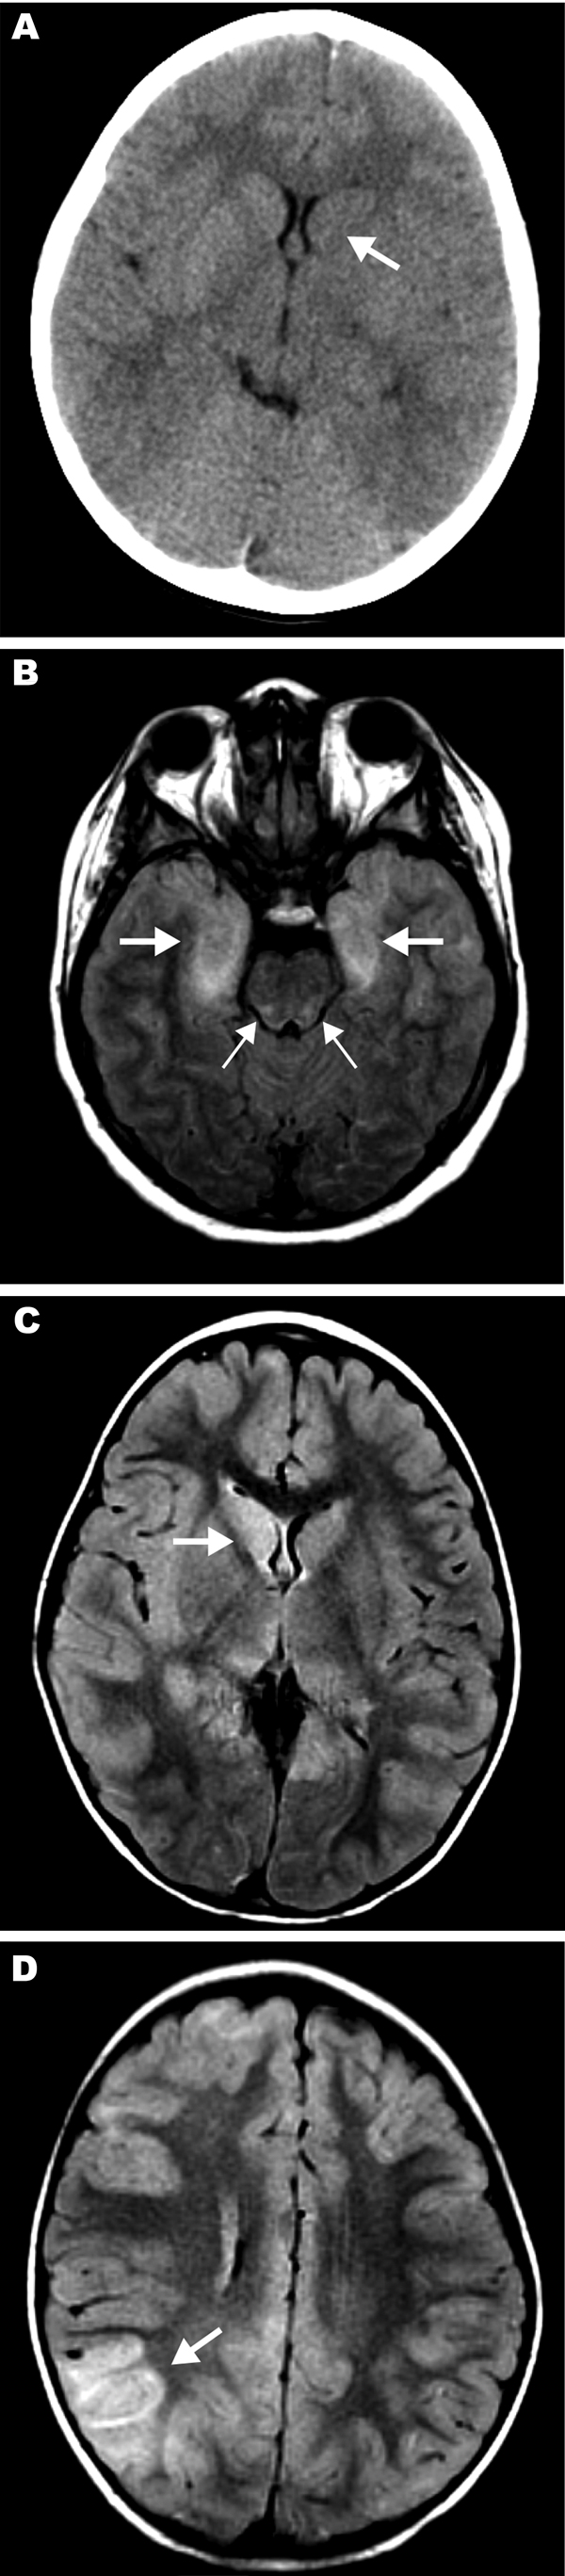 Magnetic resonance images (MRIs) and computed tomography neuroradiographs showing lesions in brains of 3 children with eastern equine encephalitis A) Results of noncontrast computed tomography scan of the brain of patient 12 on hospital day 2; the neuroradiograph shows subtle hypoattenuation of the left caudate head (arrow) and diencephalic region. B) Axial fluid attenuated inversion recovery (FLAIR) image from brain MRI scan on patient 14 on hospital day 2; the image shows abnormal T2 hyperinte